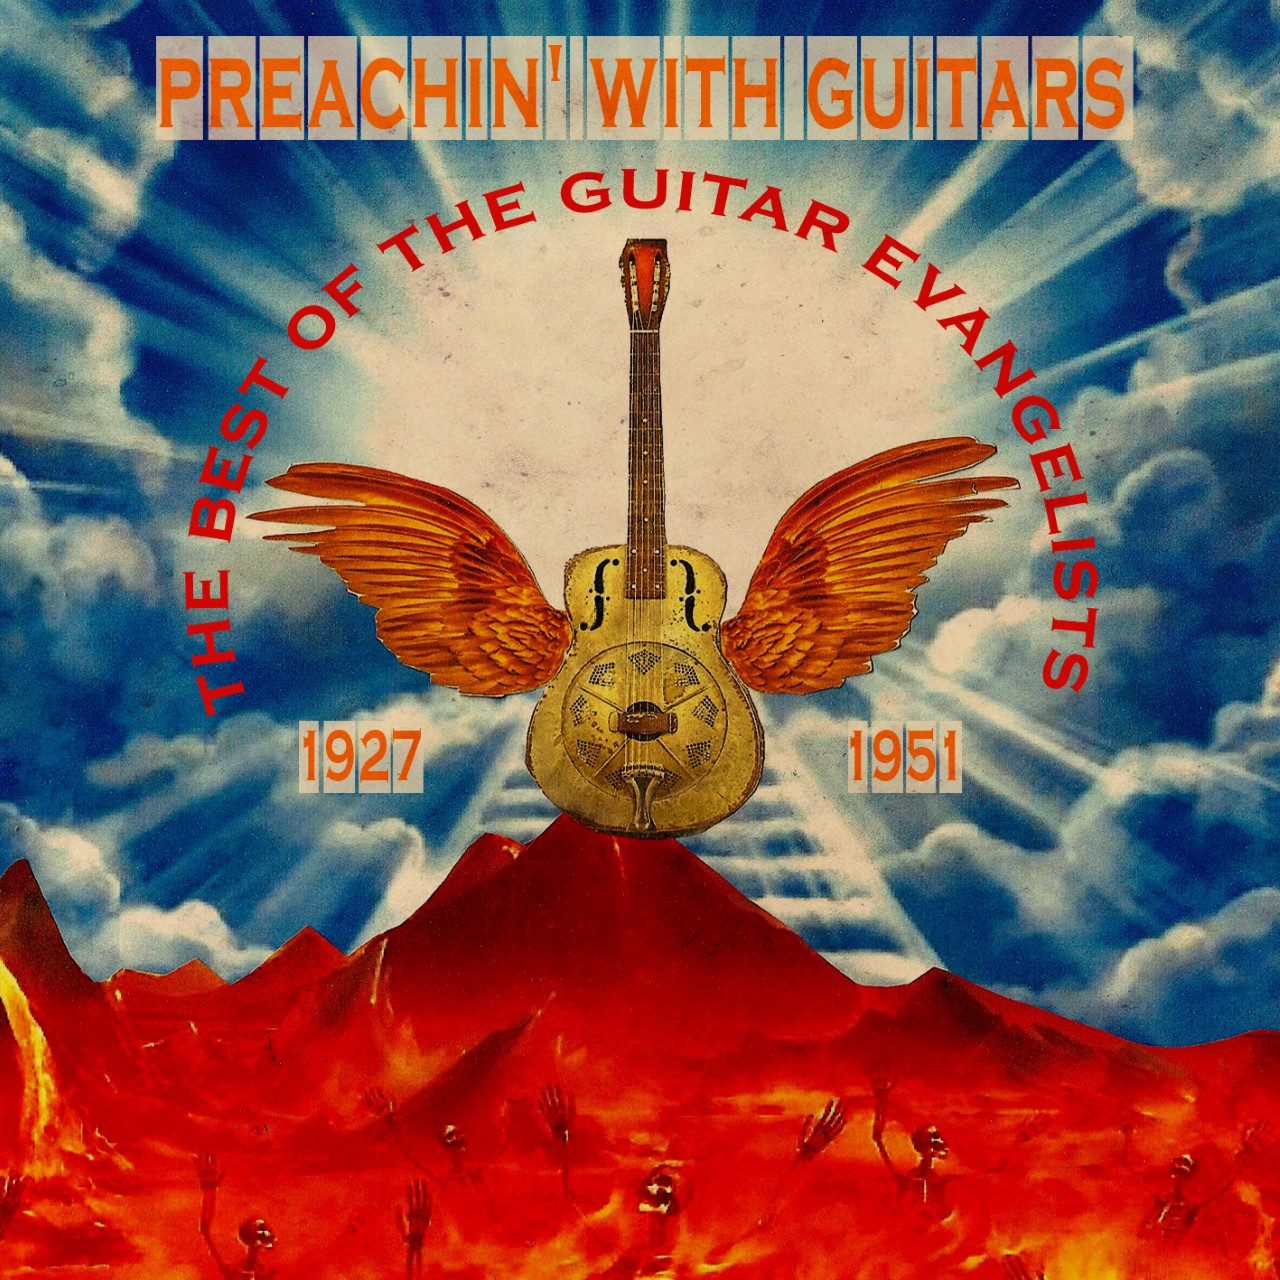 ‘Preachin’ with Guitars’ The Best of the Guitar Evangelists 1927- 1951 - Viper DL155